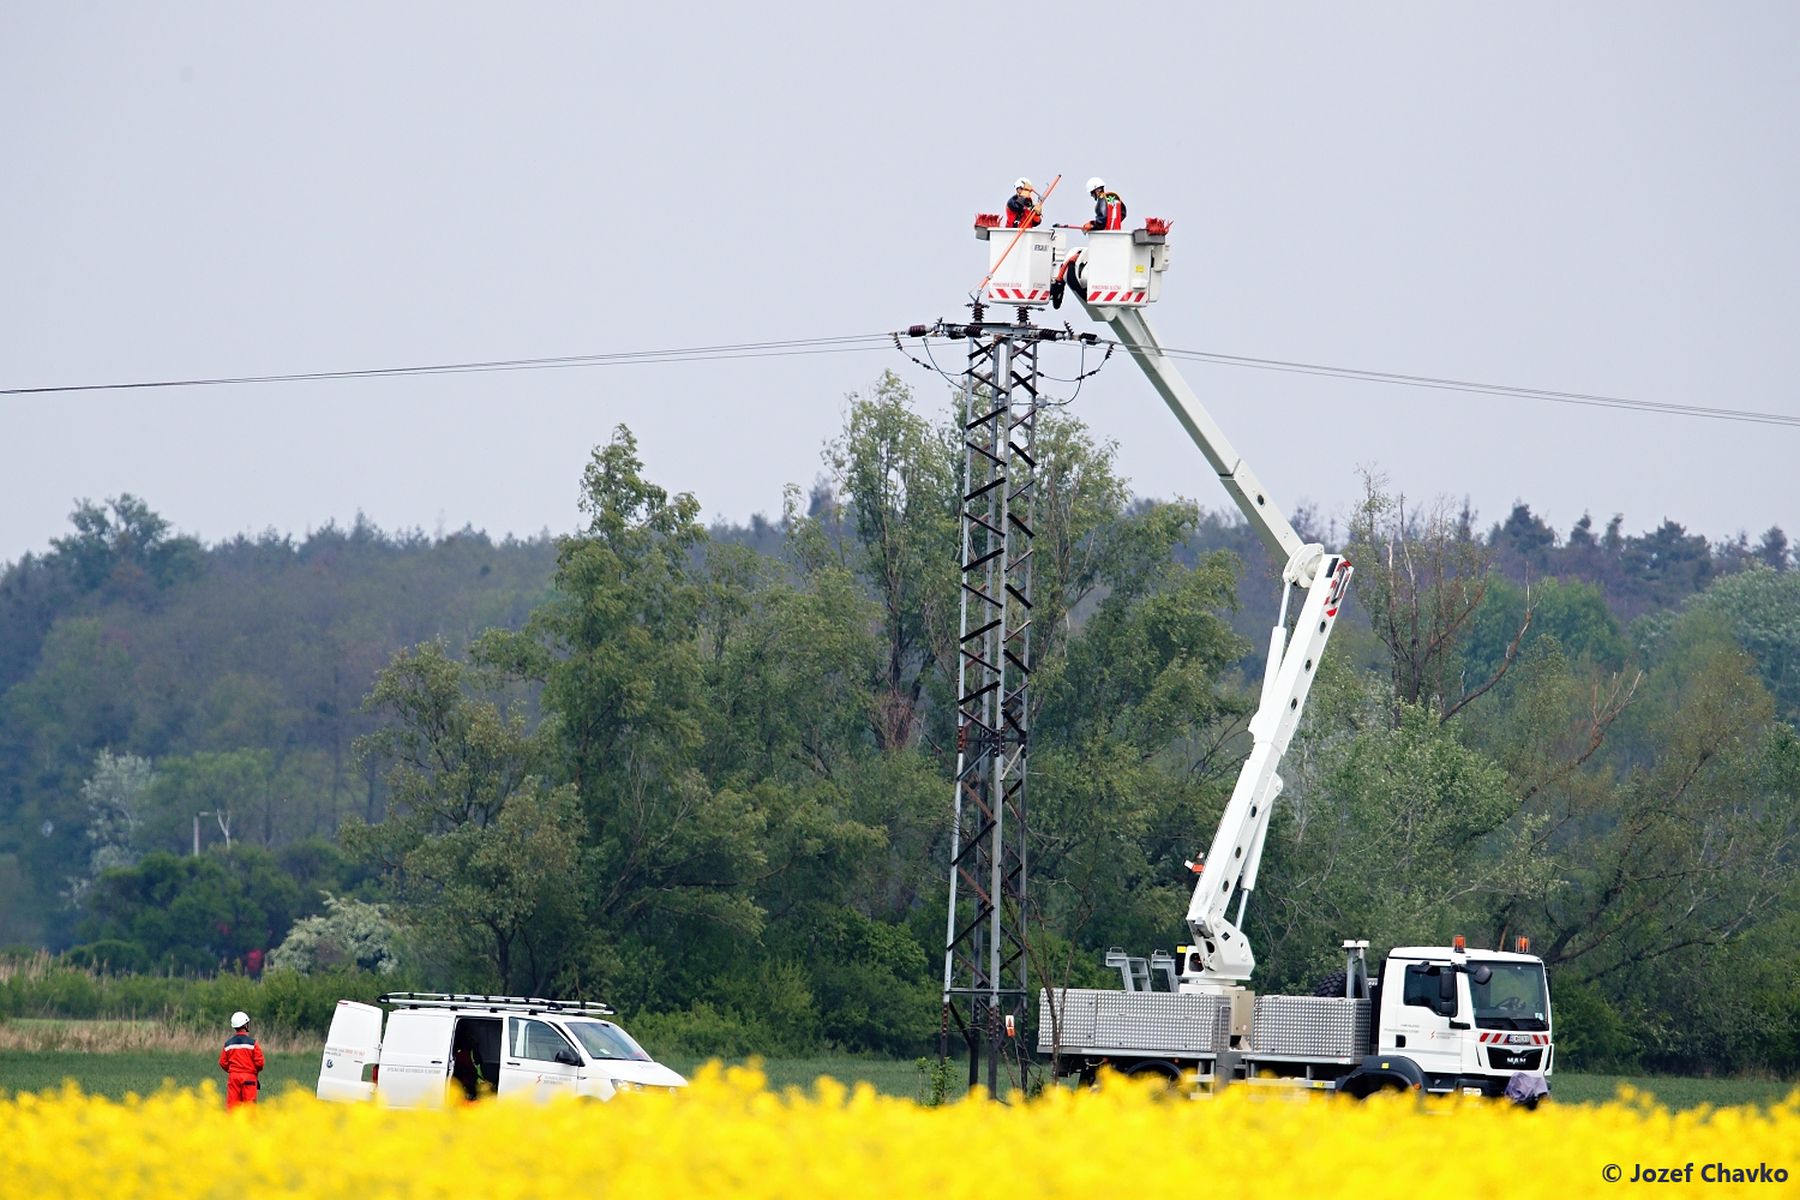 Installation of the mitigation measures on the utility pole